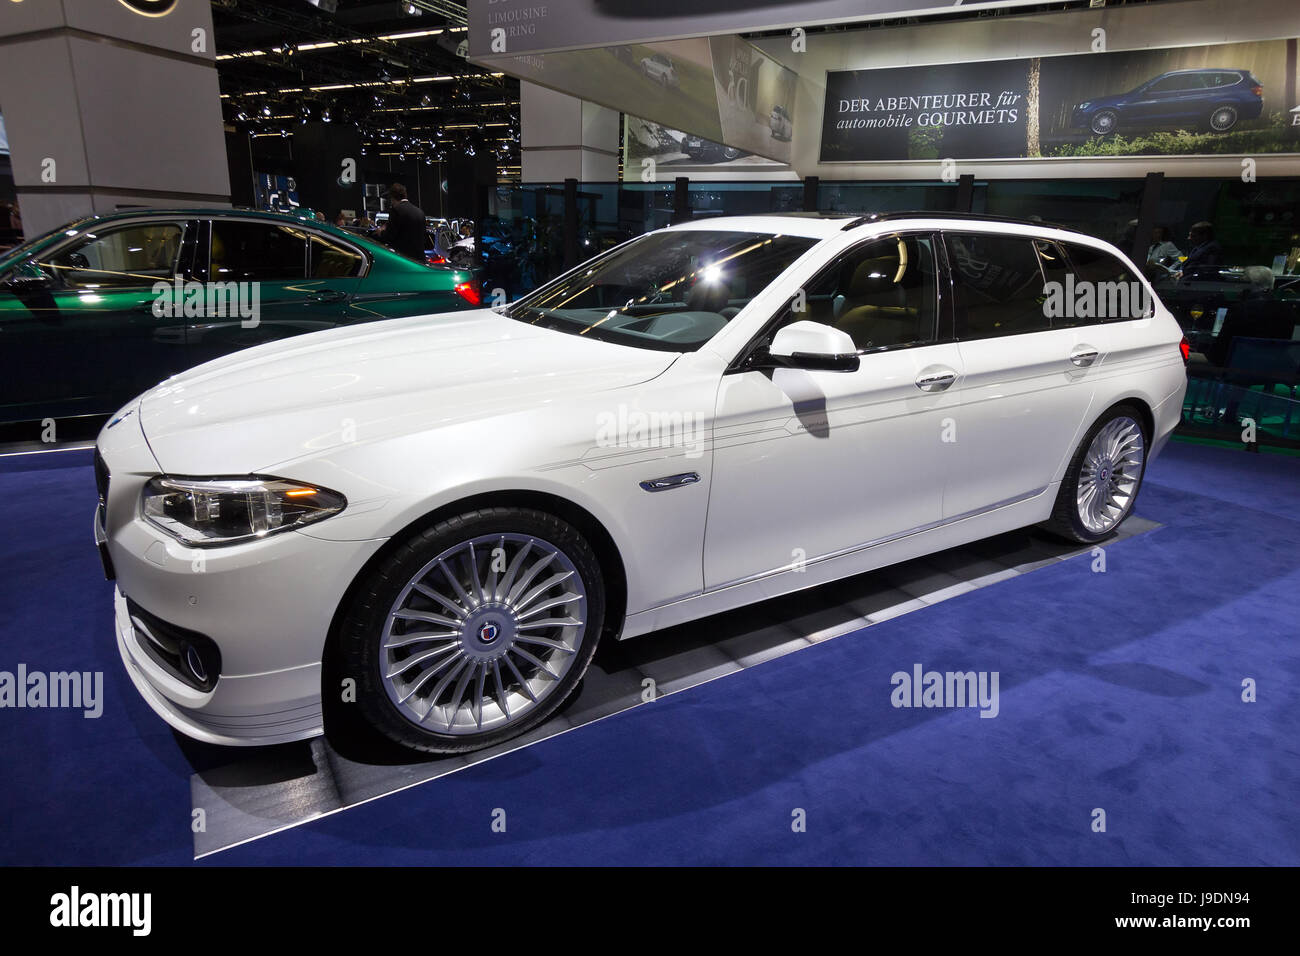 FRANKFURT, GERMANY - SEP 13: BMW Alpina B5 Bi-turbo Touring at the IAA motor show on Sep 13, 2013 in Frankfurt. More than 1.000 exhibitors from 35 cou Stock Photo